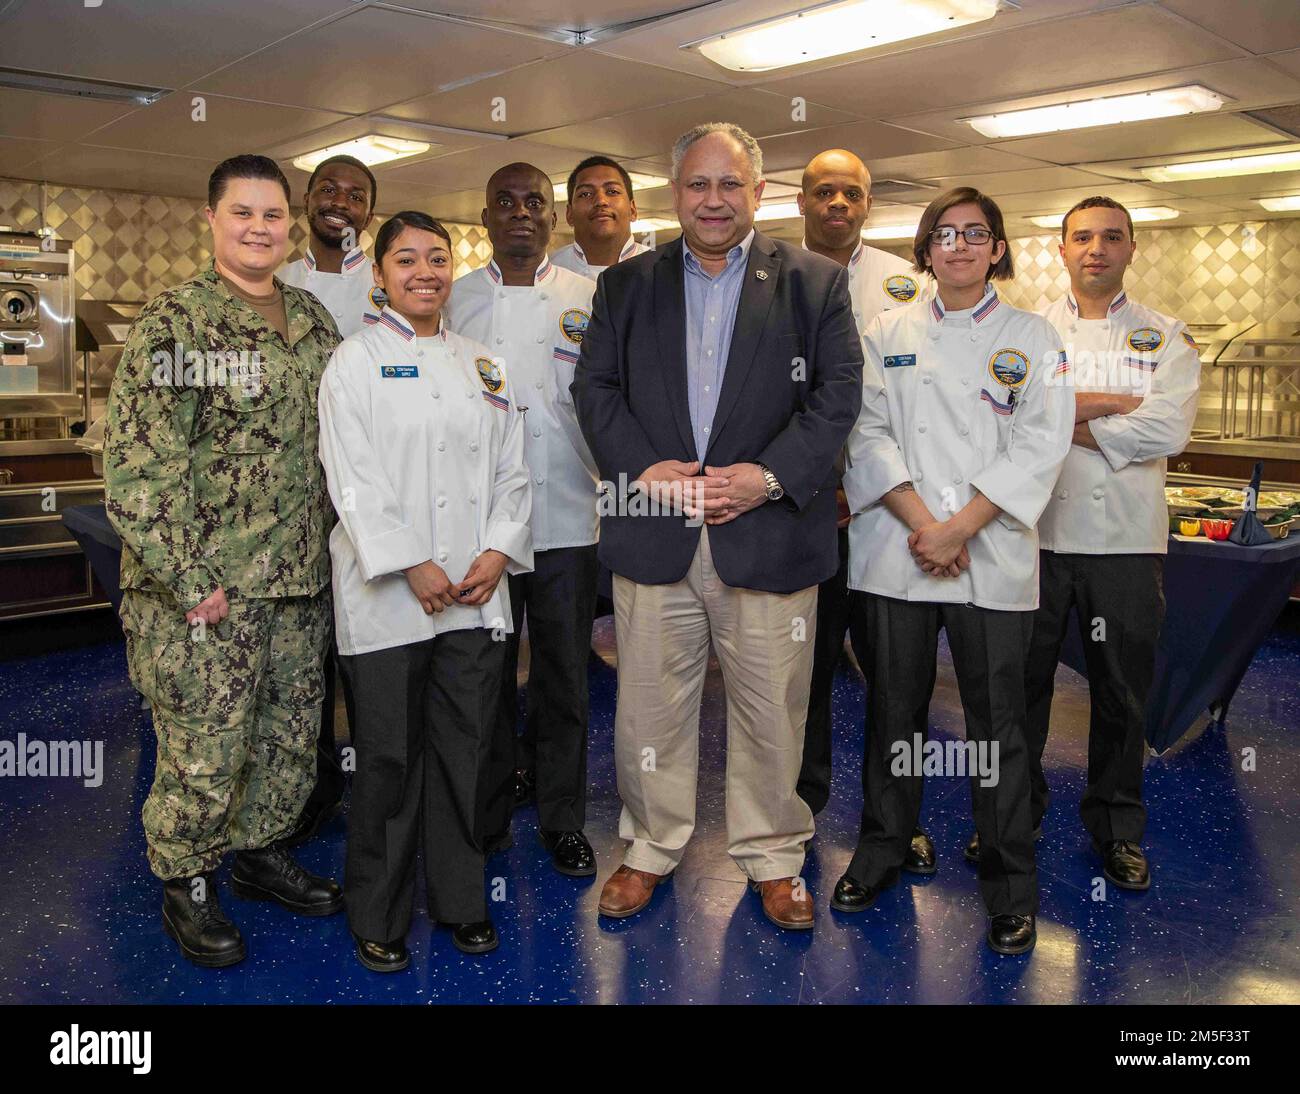 Secretary of the Navy Carlos Del Toro and Sailors assigned to USS Gerald R. Ford’s (CVN 78) supply department, pose for a group photo in the forward wardroom during a ship visit, March 10, 2022 in support of the centennial of Navy Aircraft Carriers. While onboard Del Toro conducted an all-hands call with the crew to congratulate them on their success during the ship’s planned incremental availability, and met the Ford’s leadership to discuss Ford-class unique capabilities ahead of the ship’s 2022 deployment. Stock Photo